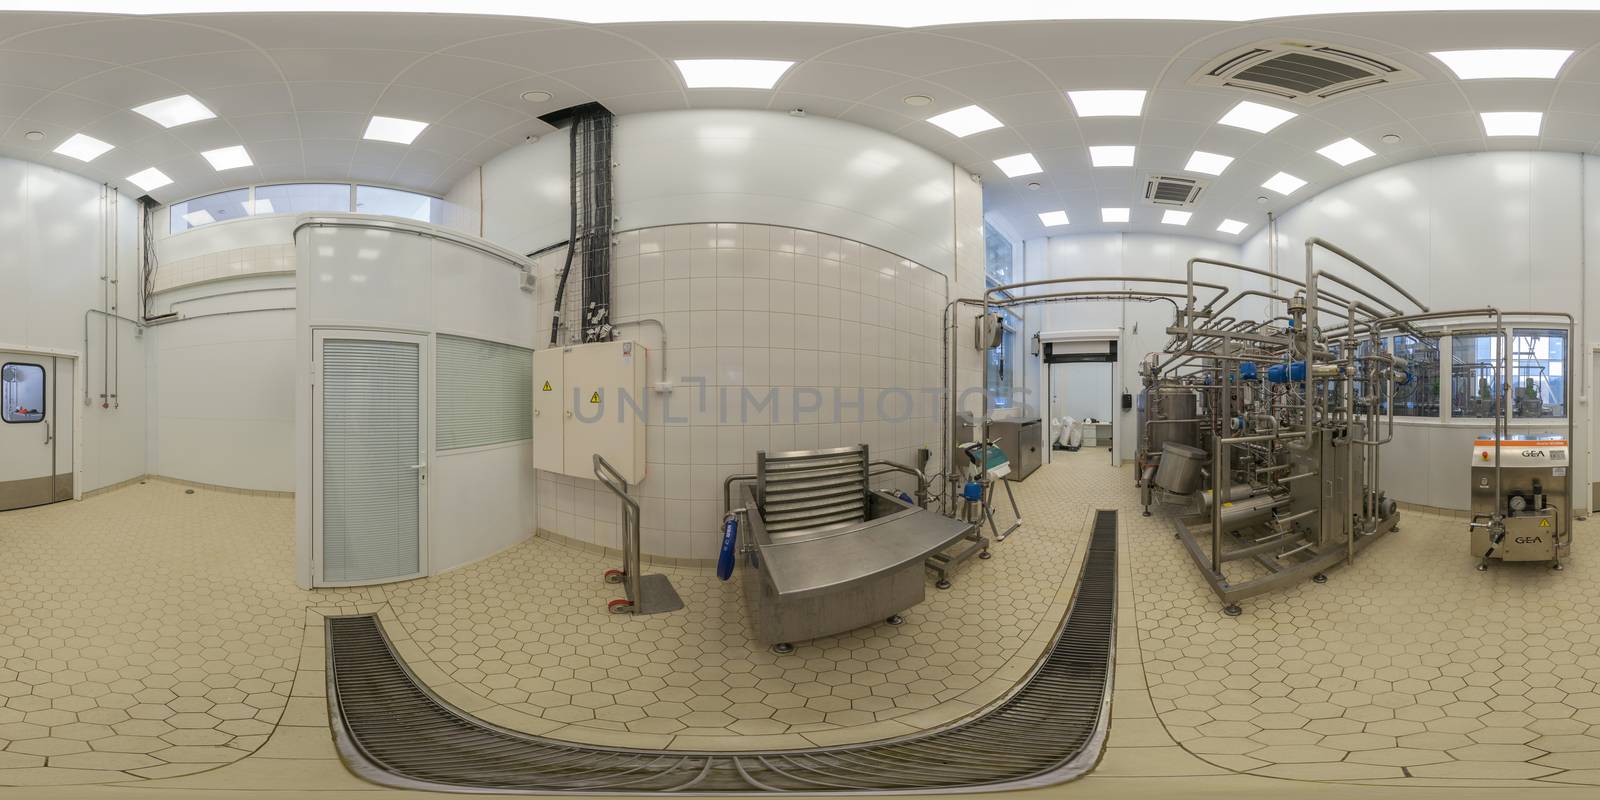 TULA, RUSSIA - FEBRUARY 11, 2013: Inside of food factory laboratory spherical panorama in equirectangular projection. by z1b